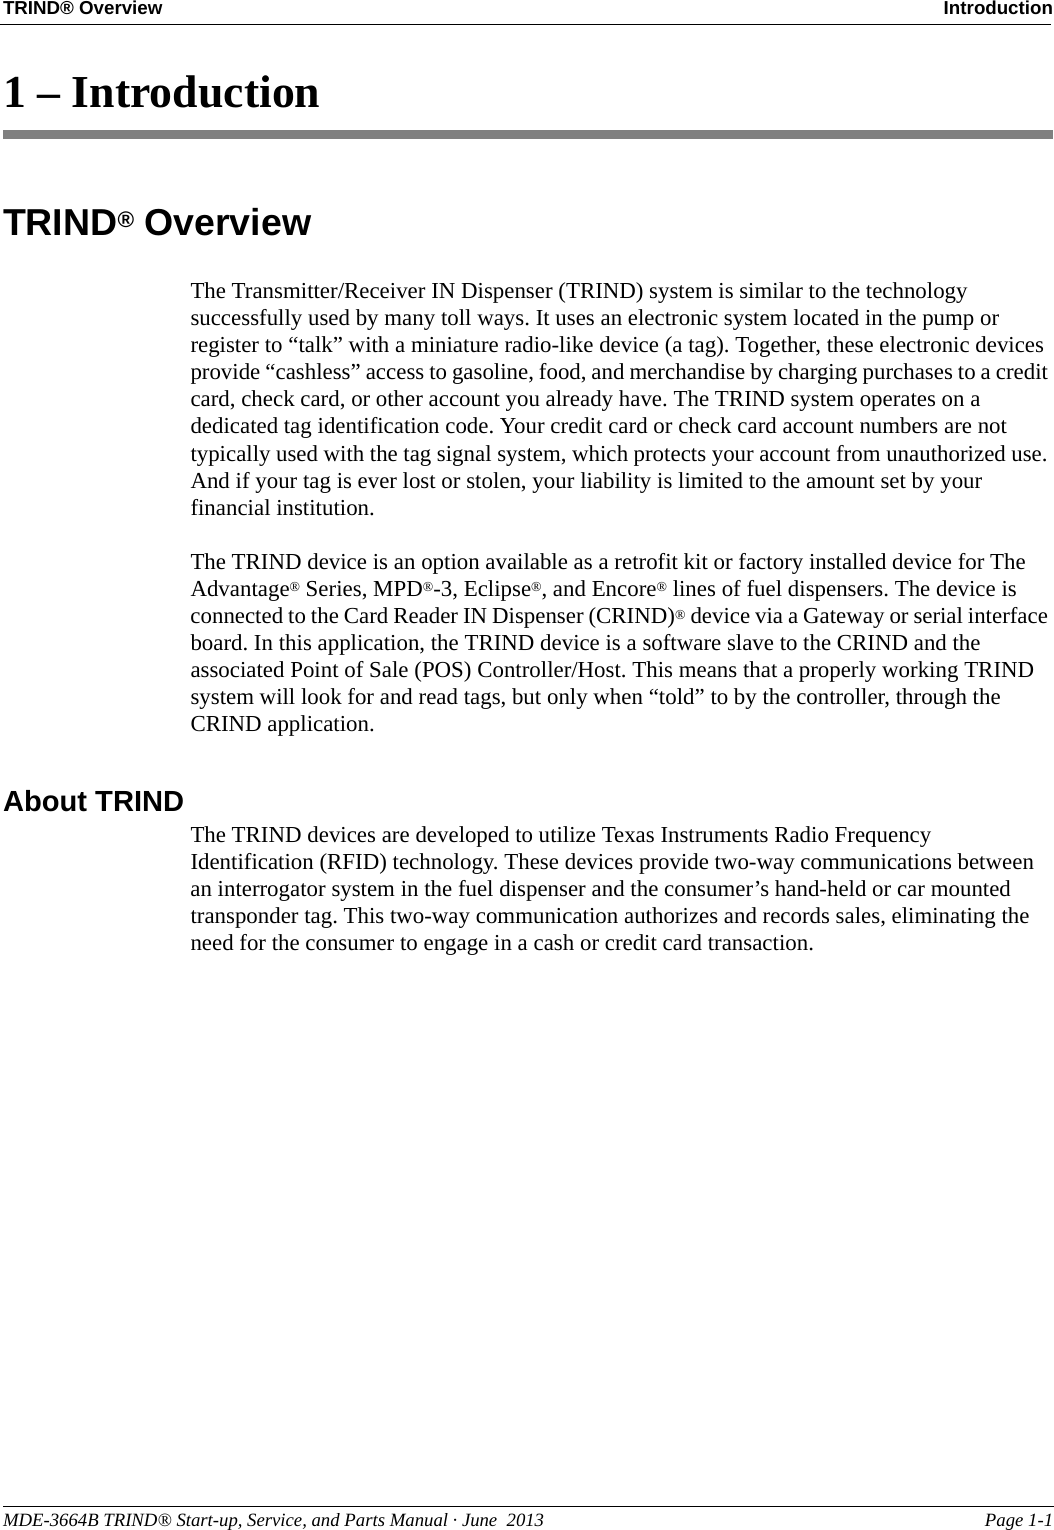 MDE-3664B TRIND® Start-up, Service, and Parts Manual · June  2013 Page 1-1TRIND® Overview Introduction1 – IntroductionTRIND® OverviewThe Transmitter/Receiver IN Dispenser (TRIND) system is similar to the technology successfully used by many toll ways. It uses an electronic system located in the pump or register to “talk” with a miniature radio-like device (a tag). Together, these electronic devices provide “cashless” access to gasoline, food, and merchandise by charging purchases to a credit card, check card, or other account you already have. The TRIND system operates on a dedicated tag identification code. Your credit card or check card account numbers are not typically used with the tag signal system, which protects your account from unauthorized use. And if your tag is ever lost or stolen, your liability is limited to the amount set by your financial institution. The TRIND device is an option available as a retrofit kit or factory installed device for The Advantage® Series, MPD®-3, Eclipse®, and Encore® lines of fuel dispensers. The device is connected to the Card Reader IN Dispenser (CRIND)® device via a Gateway or serial interface board. In this application, the TRIND device is a software slave to the CRIND and the associated Point of Sale (POS) Controller/Host. This means that a properly working TRIND system will look for and read tags, but only when “told” to by the controller, through the CRIND application.About TRINDThe TRIND devices are developed to utilize Texas Instruments Radio Frequency Identification (RFID) technology. These devices provide two-way communications between an interrogator system in the fuel dispenser and the consumer’s hand-held or car mounted transponder tag. This two-way communication authorizes and records sales, eliminating the need for the consumer to engage in a cash or credit card transaction.